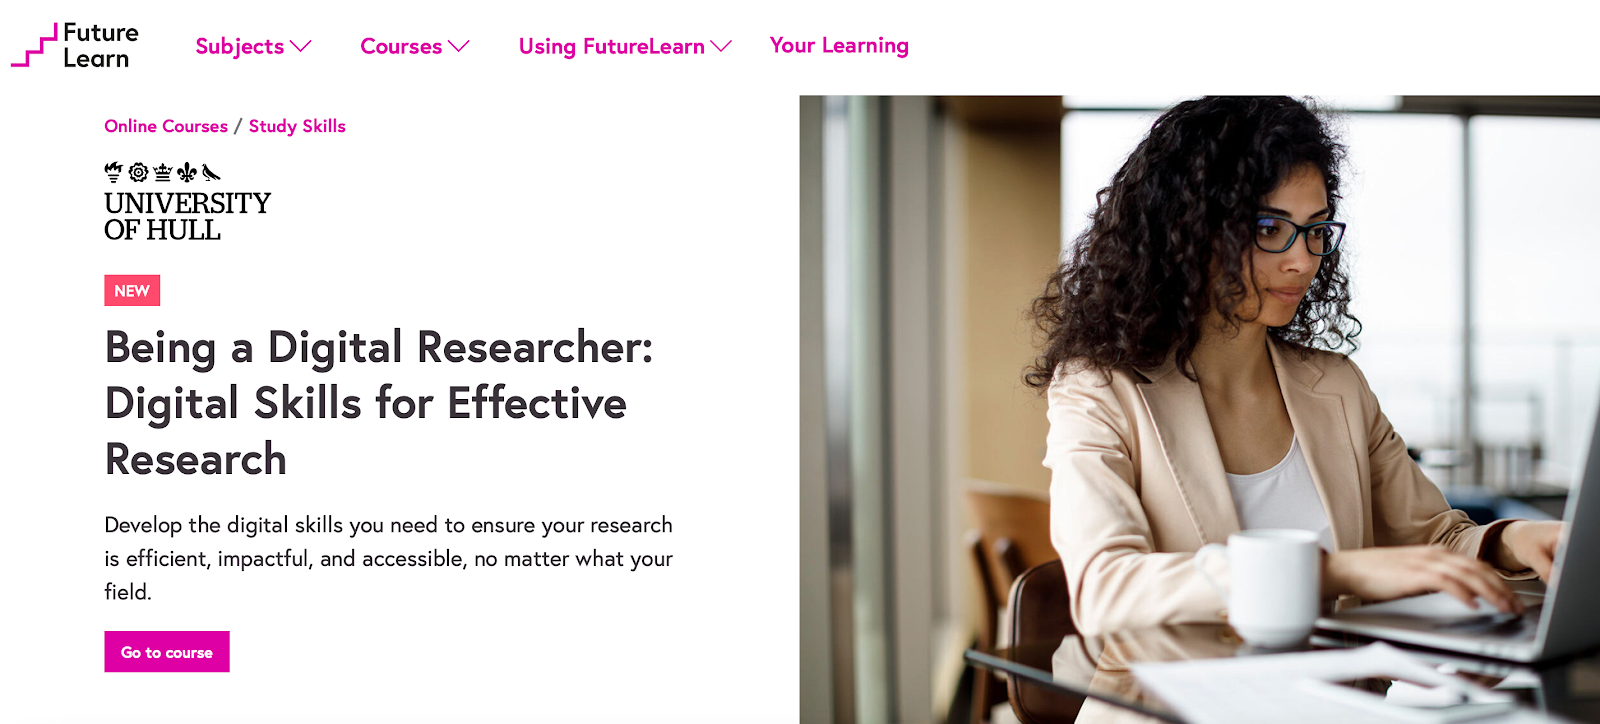 The course landing page for the Being a Digital Researcher: Digital Skills for Effective Research 